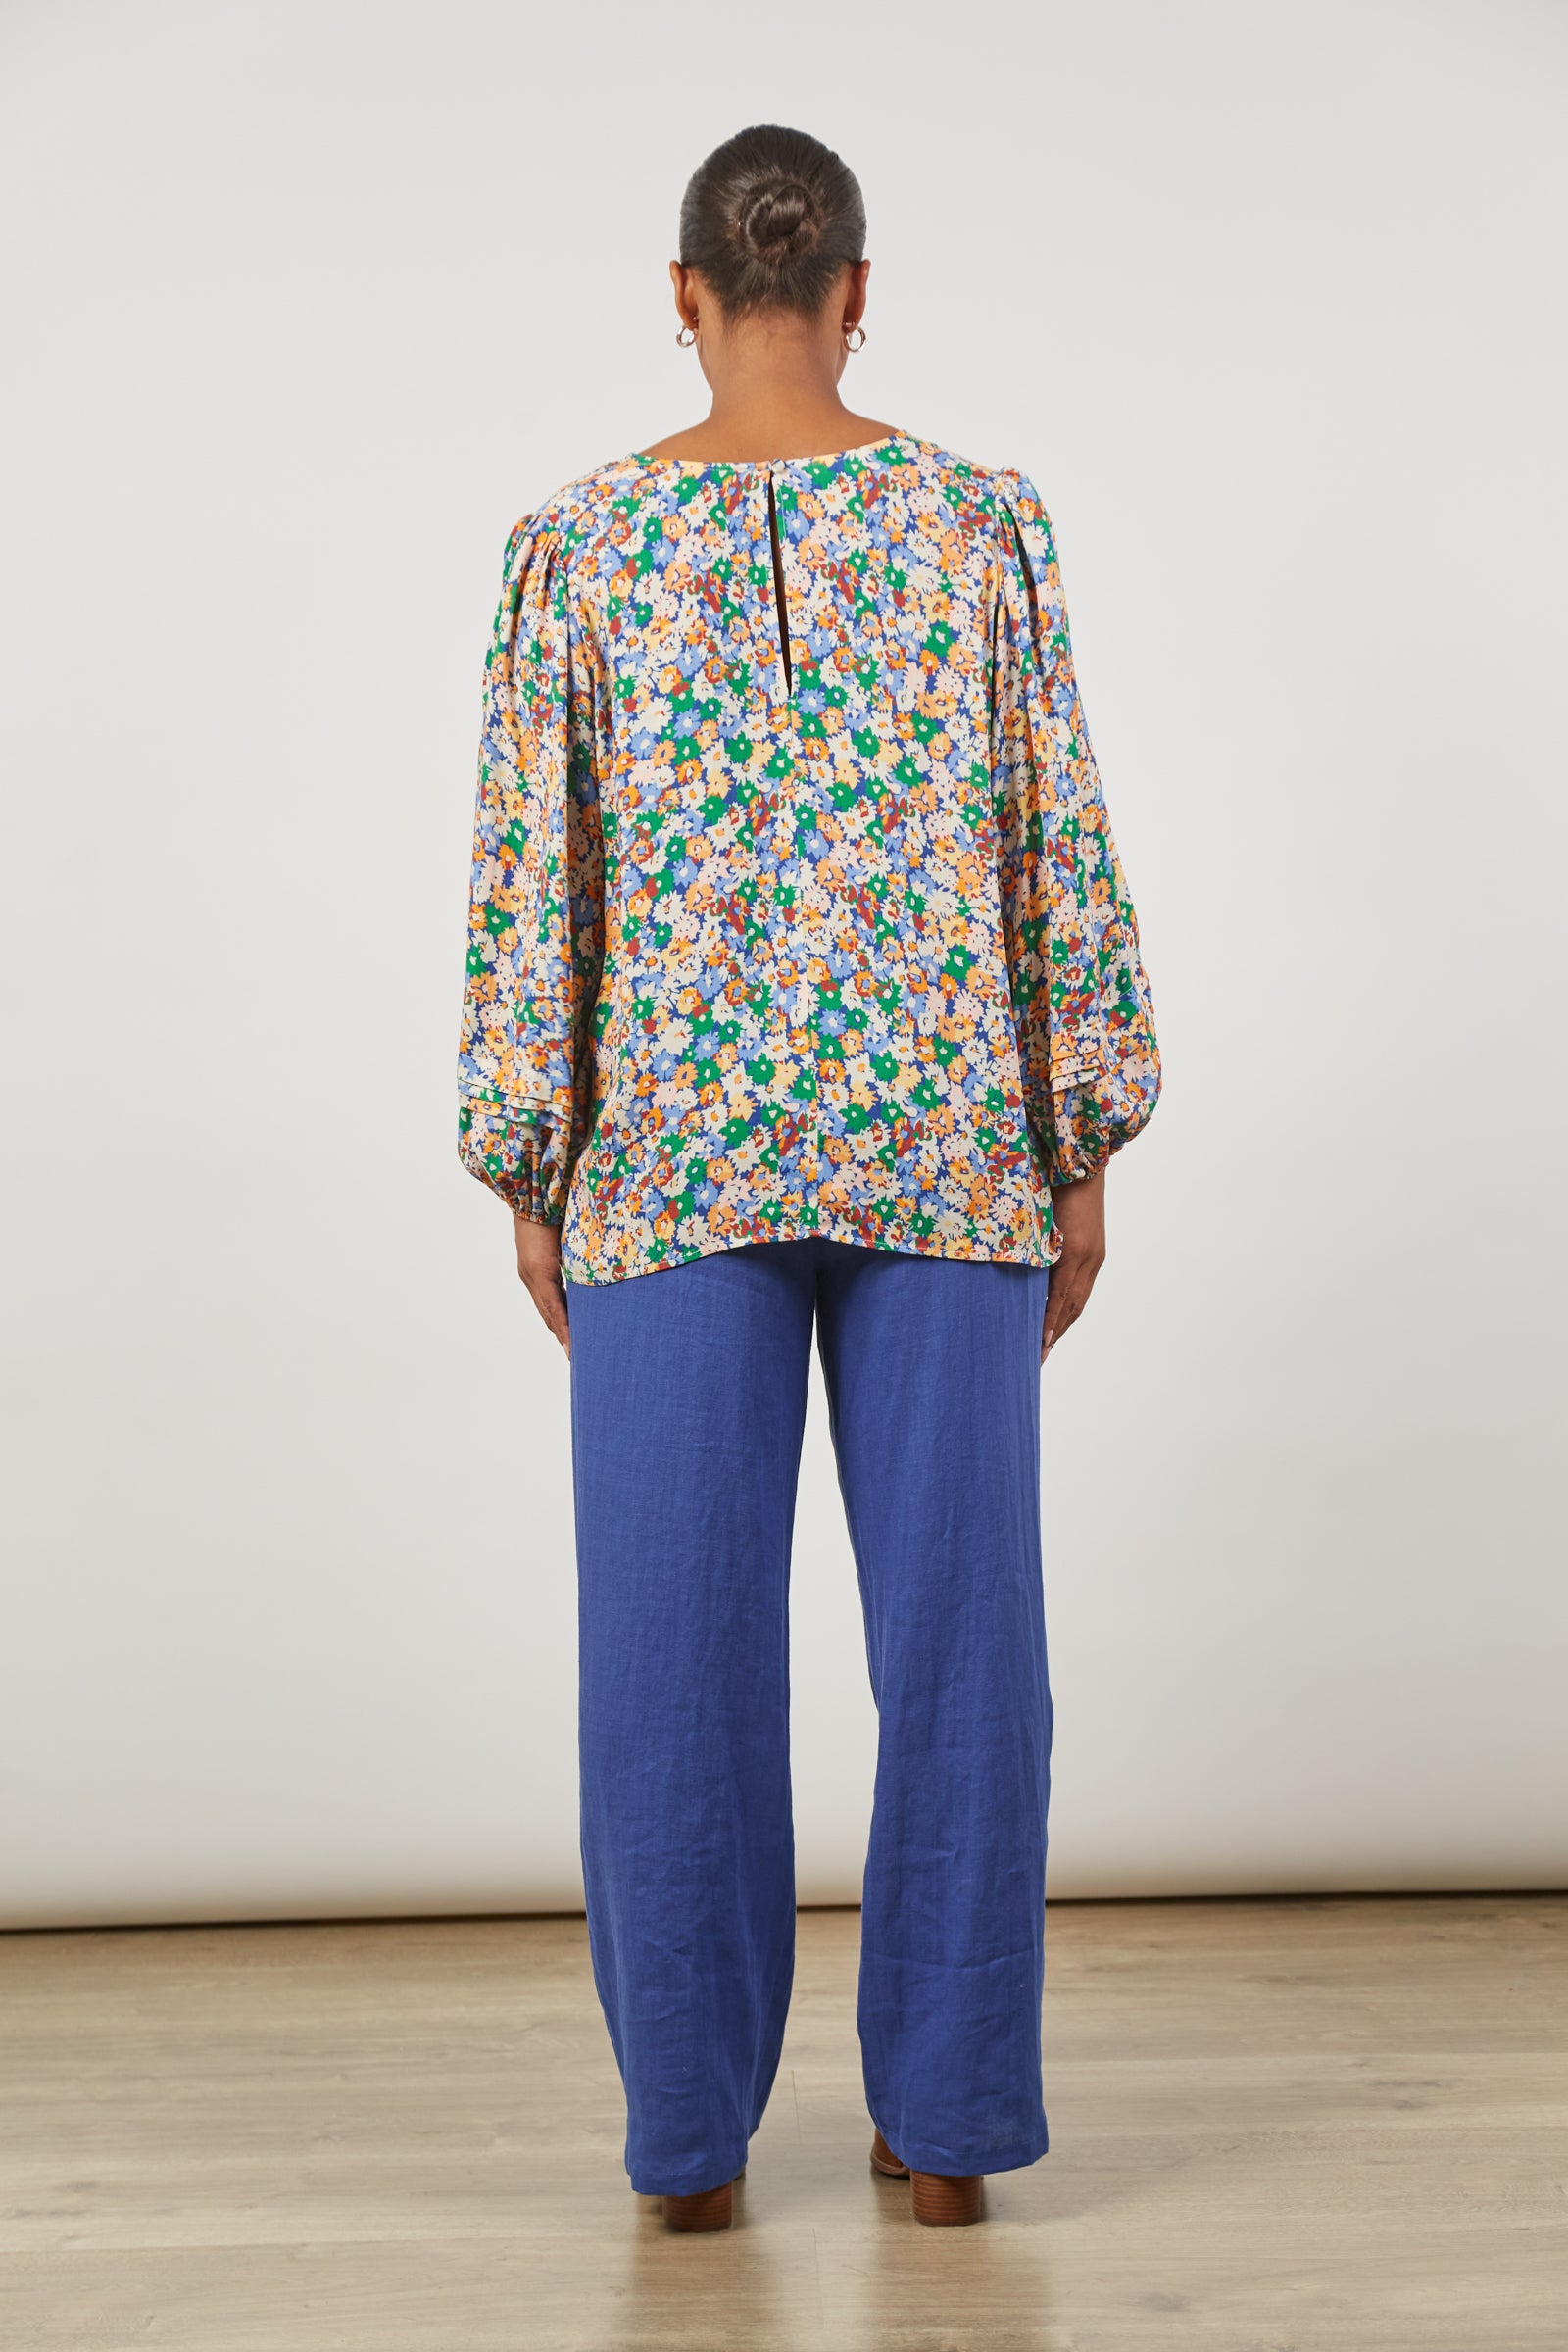 Euphoria V Blouse - Meadow Bloom - Isle of Mine Clothing - Top L/S Dressy